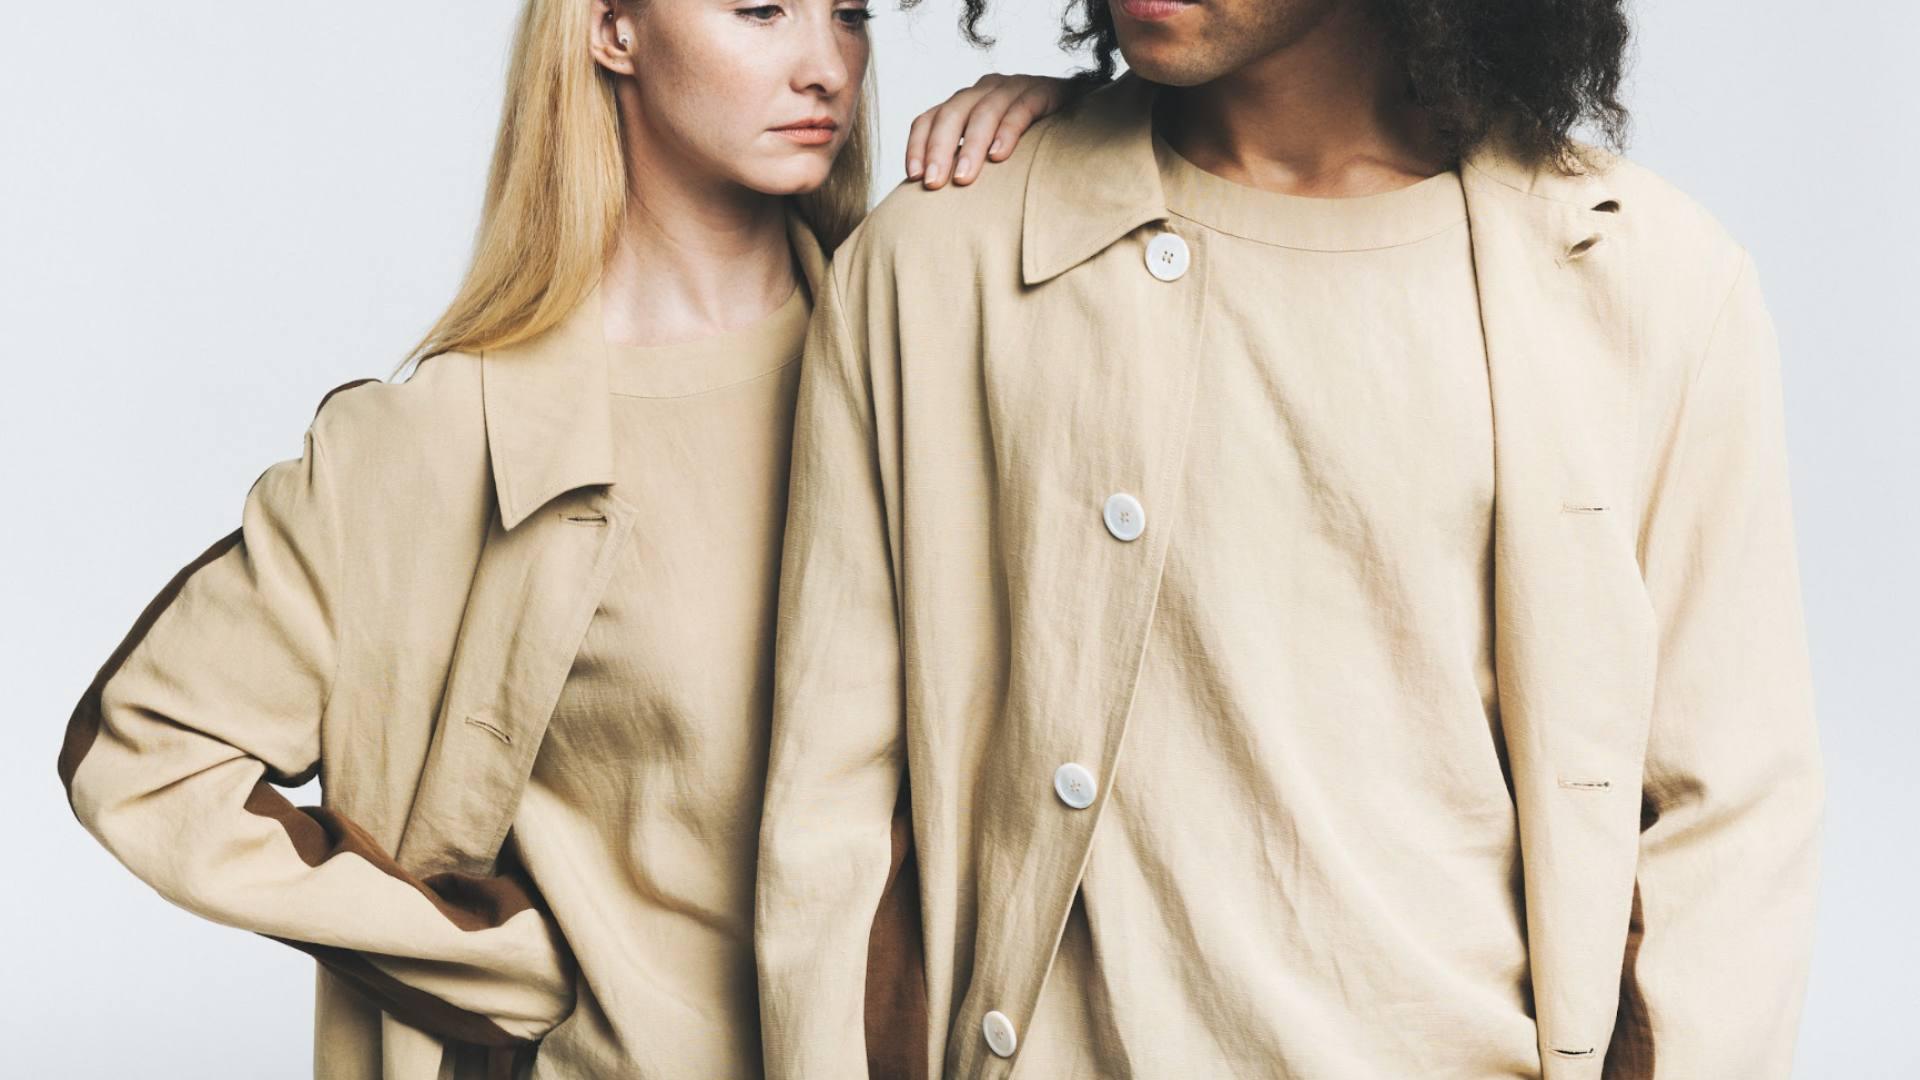 Two models stand side by side while wearing earth tone sustainable clothing made from bamboo fibers.